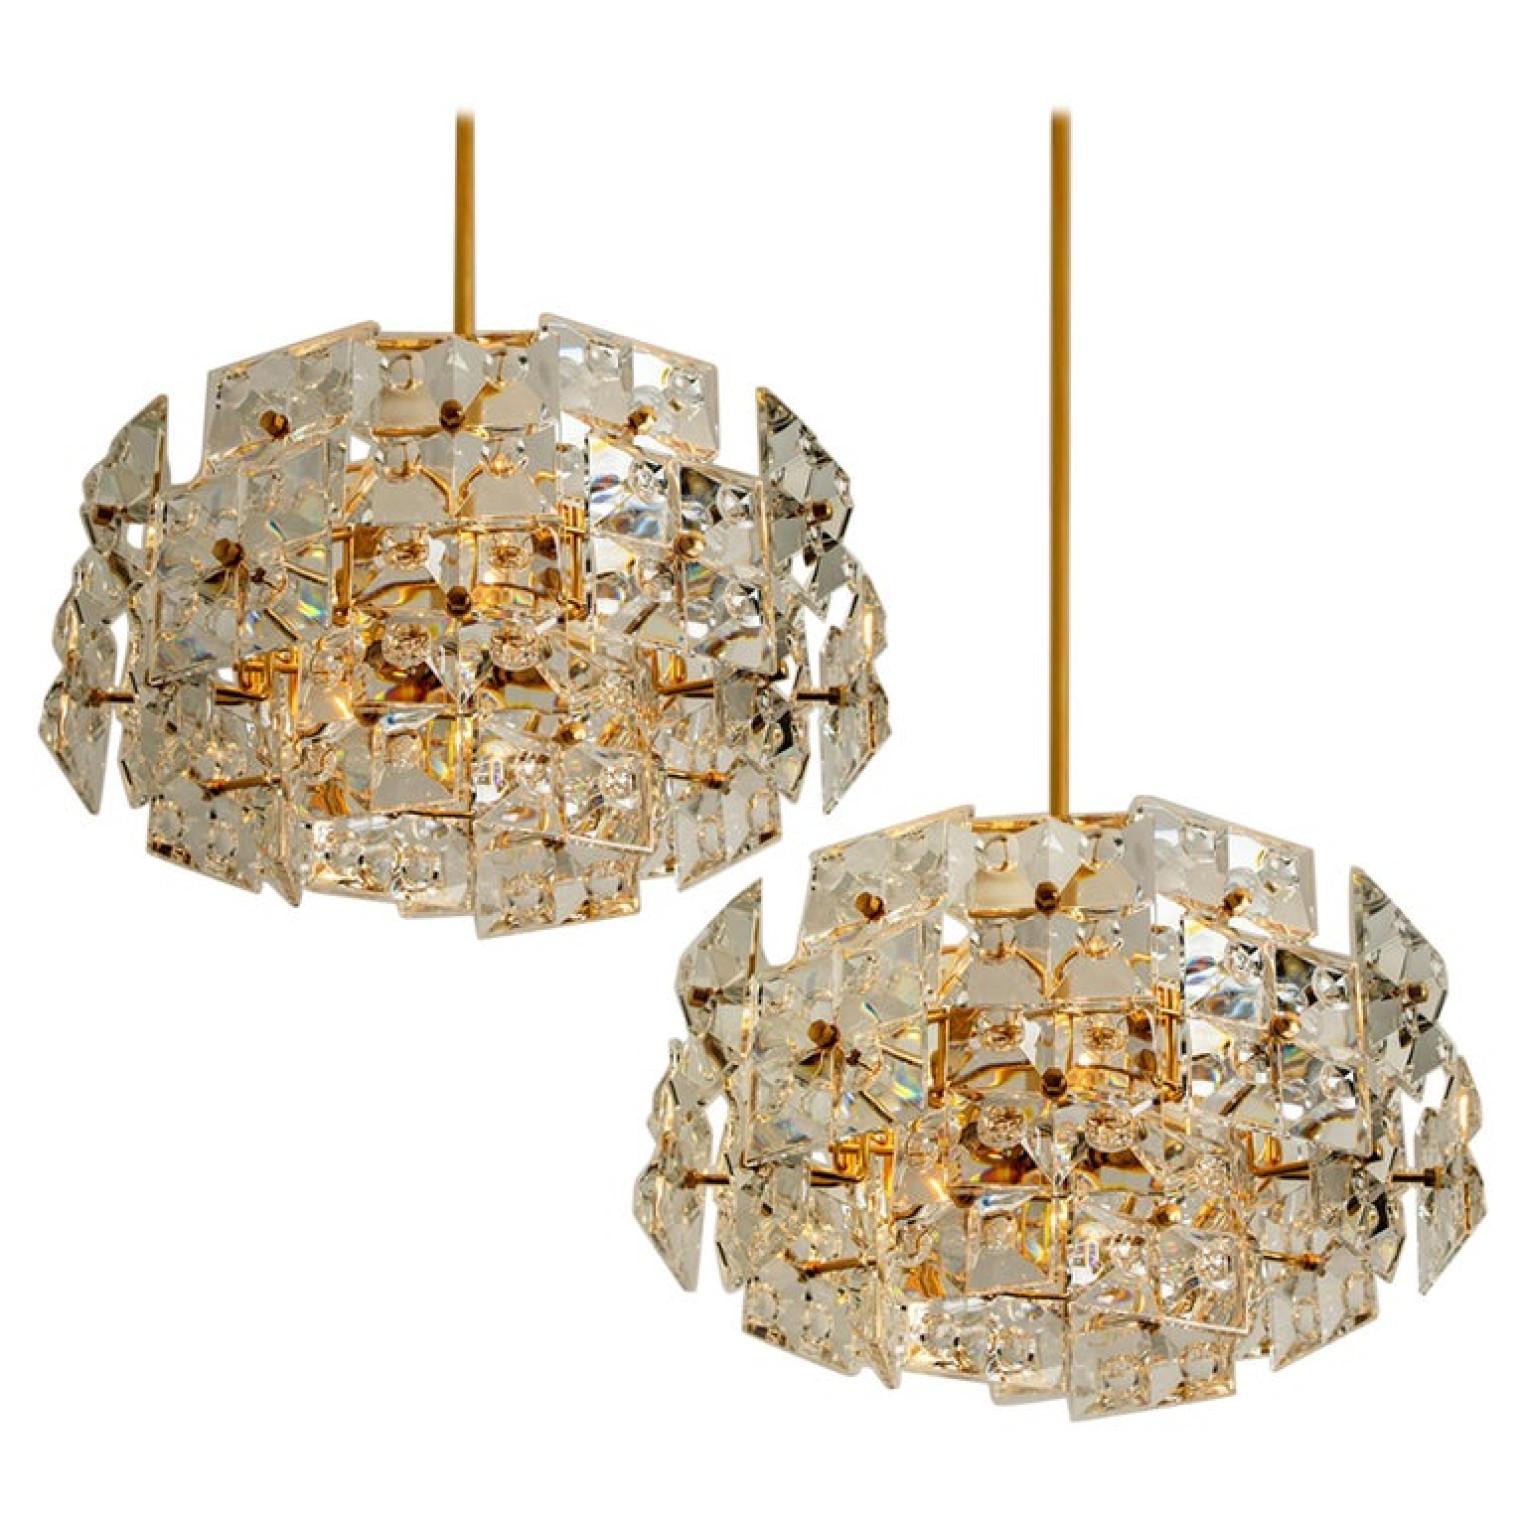 A very exclusive and high quality chandelier by Kinkeldey, Germany, manufactured in midcentury, circa 1970 (late 1960s or early 1970s). It is made of a gilded / gilt frame which holds large cut crystal glass with the dimensions of 4 x 4 in. (10 x 10